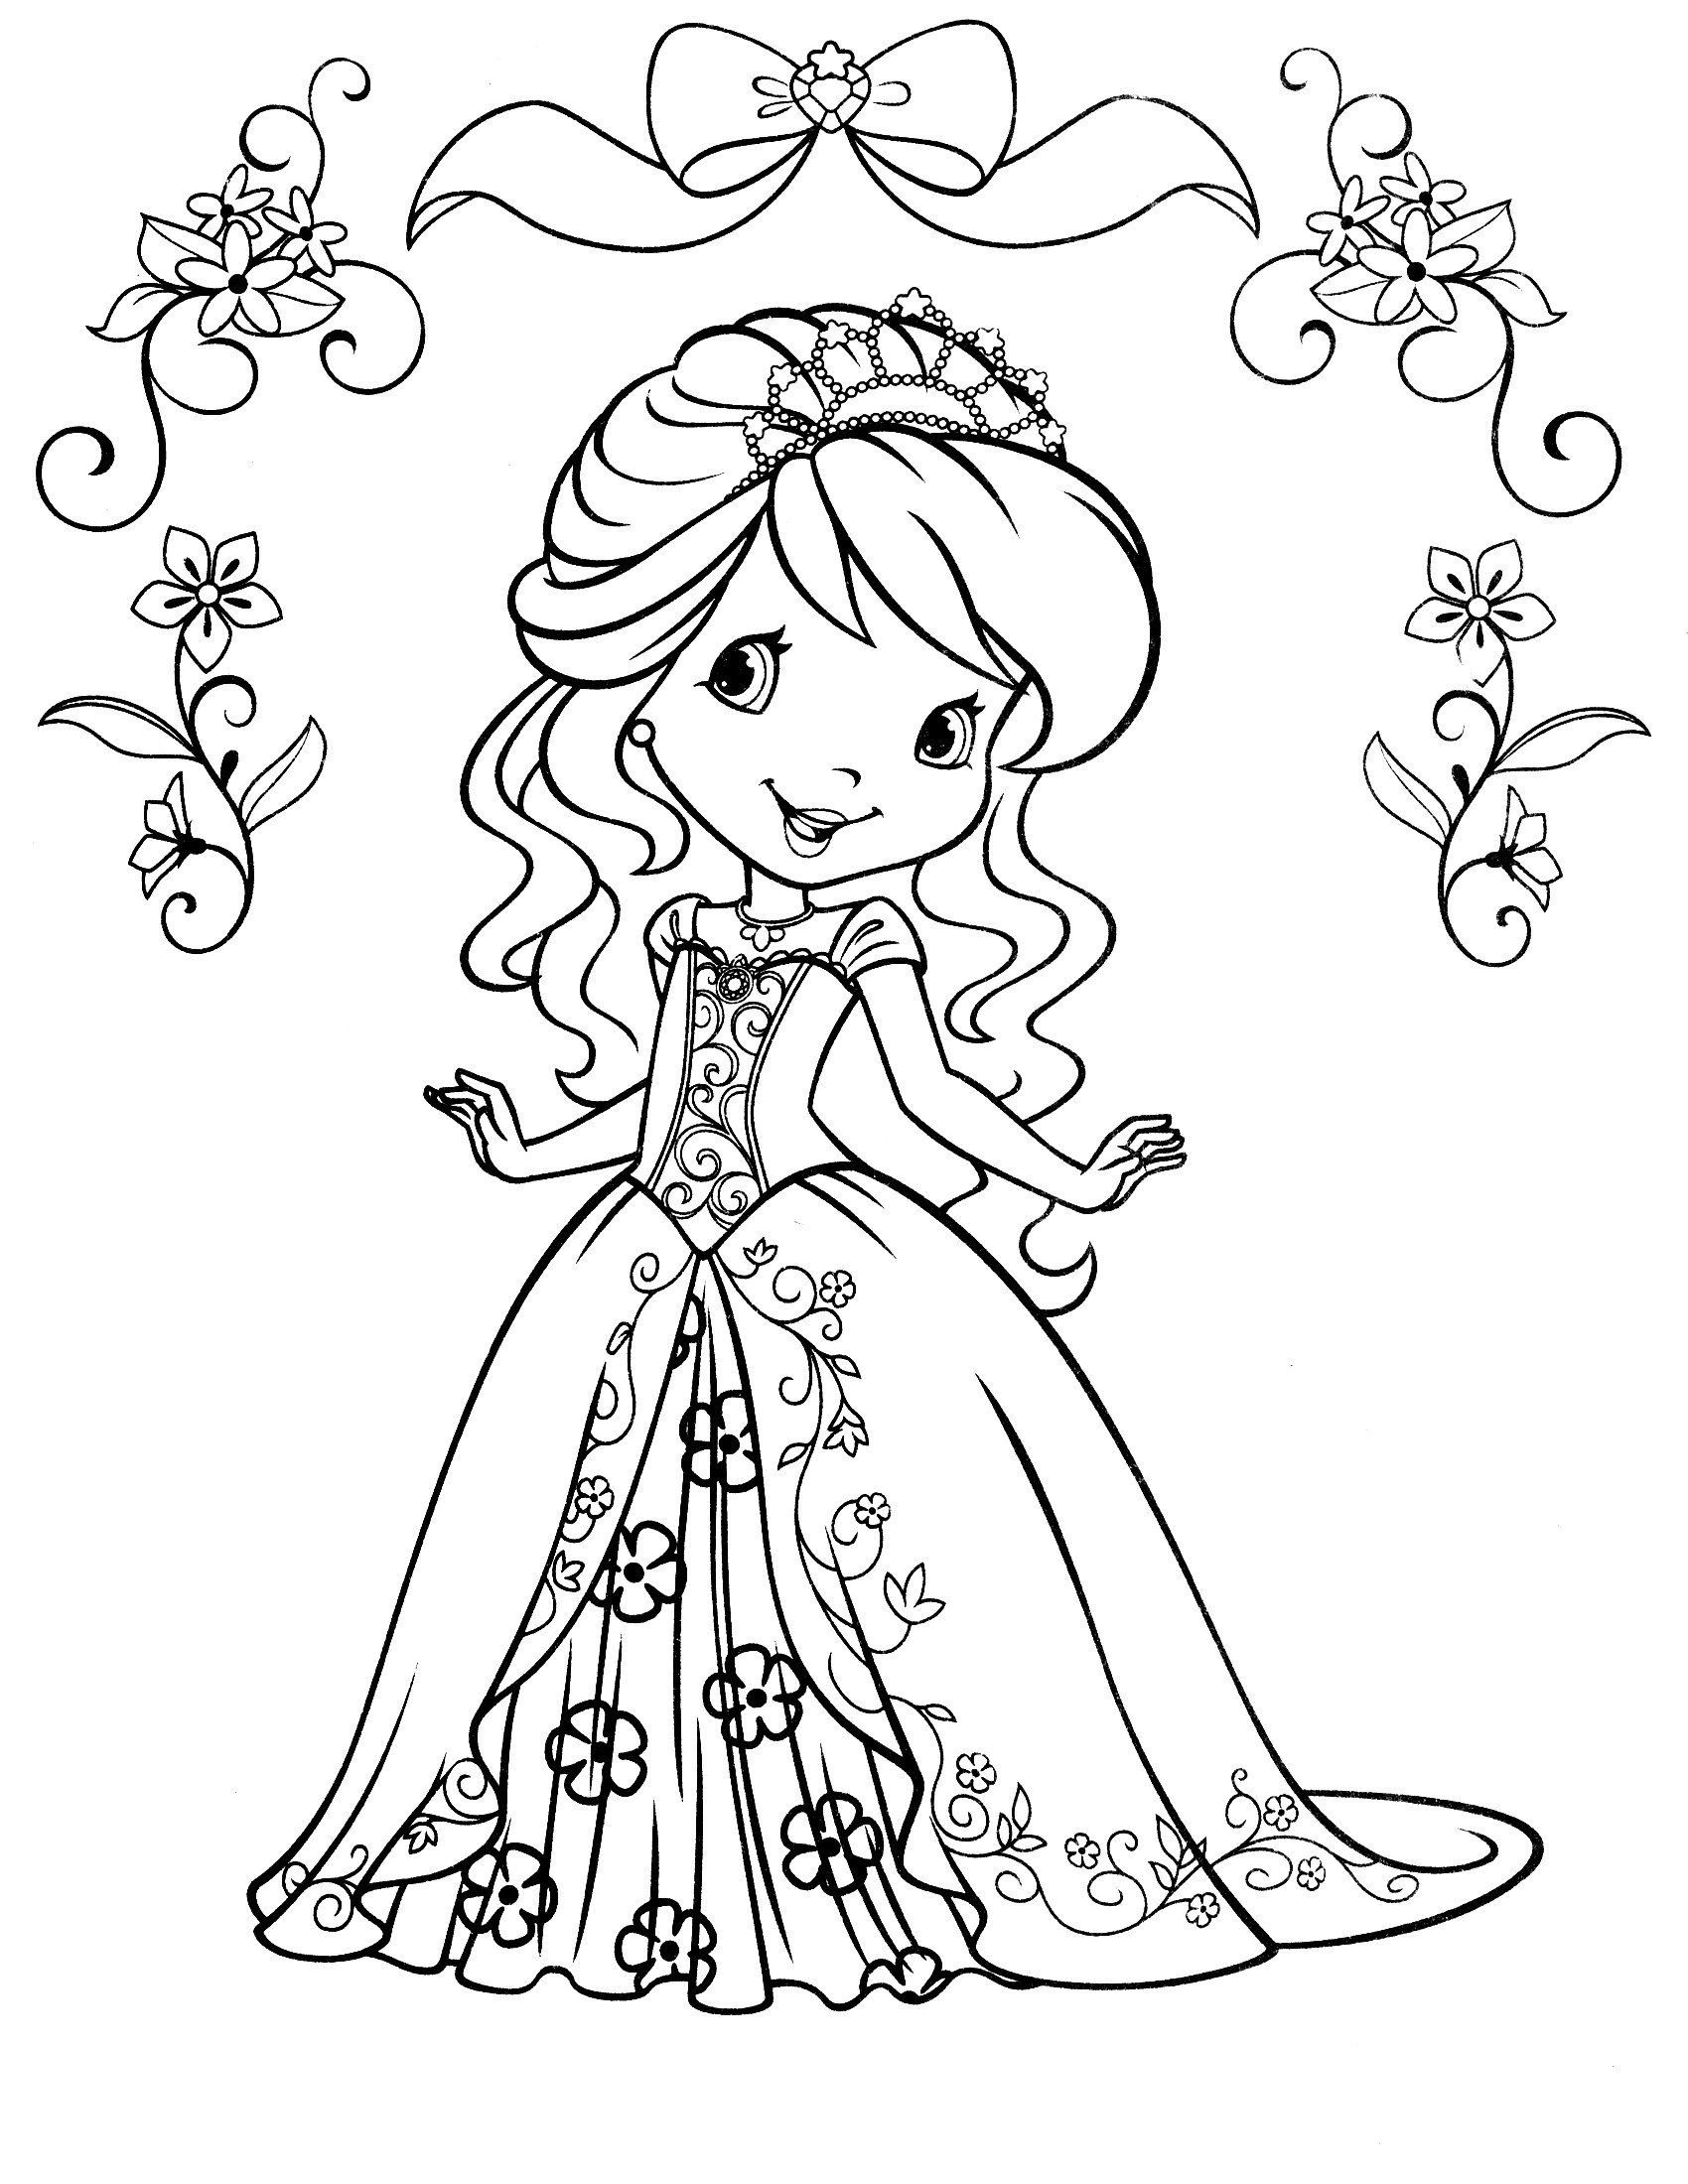 Butterfly Princess Coloring Pages at GetDrawings Free download